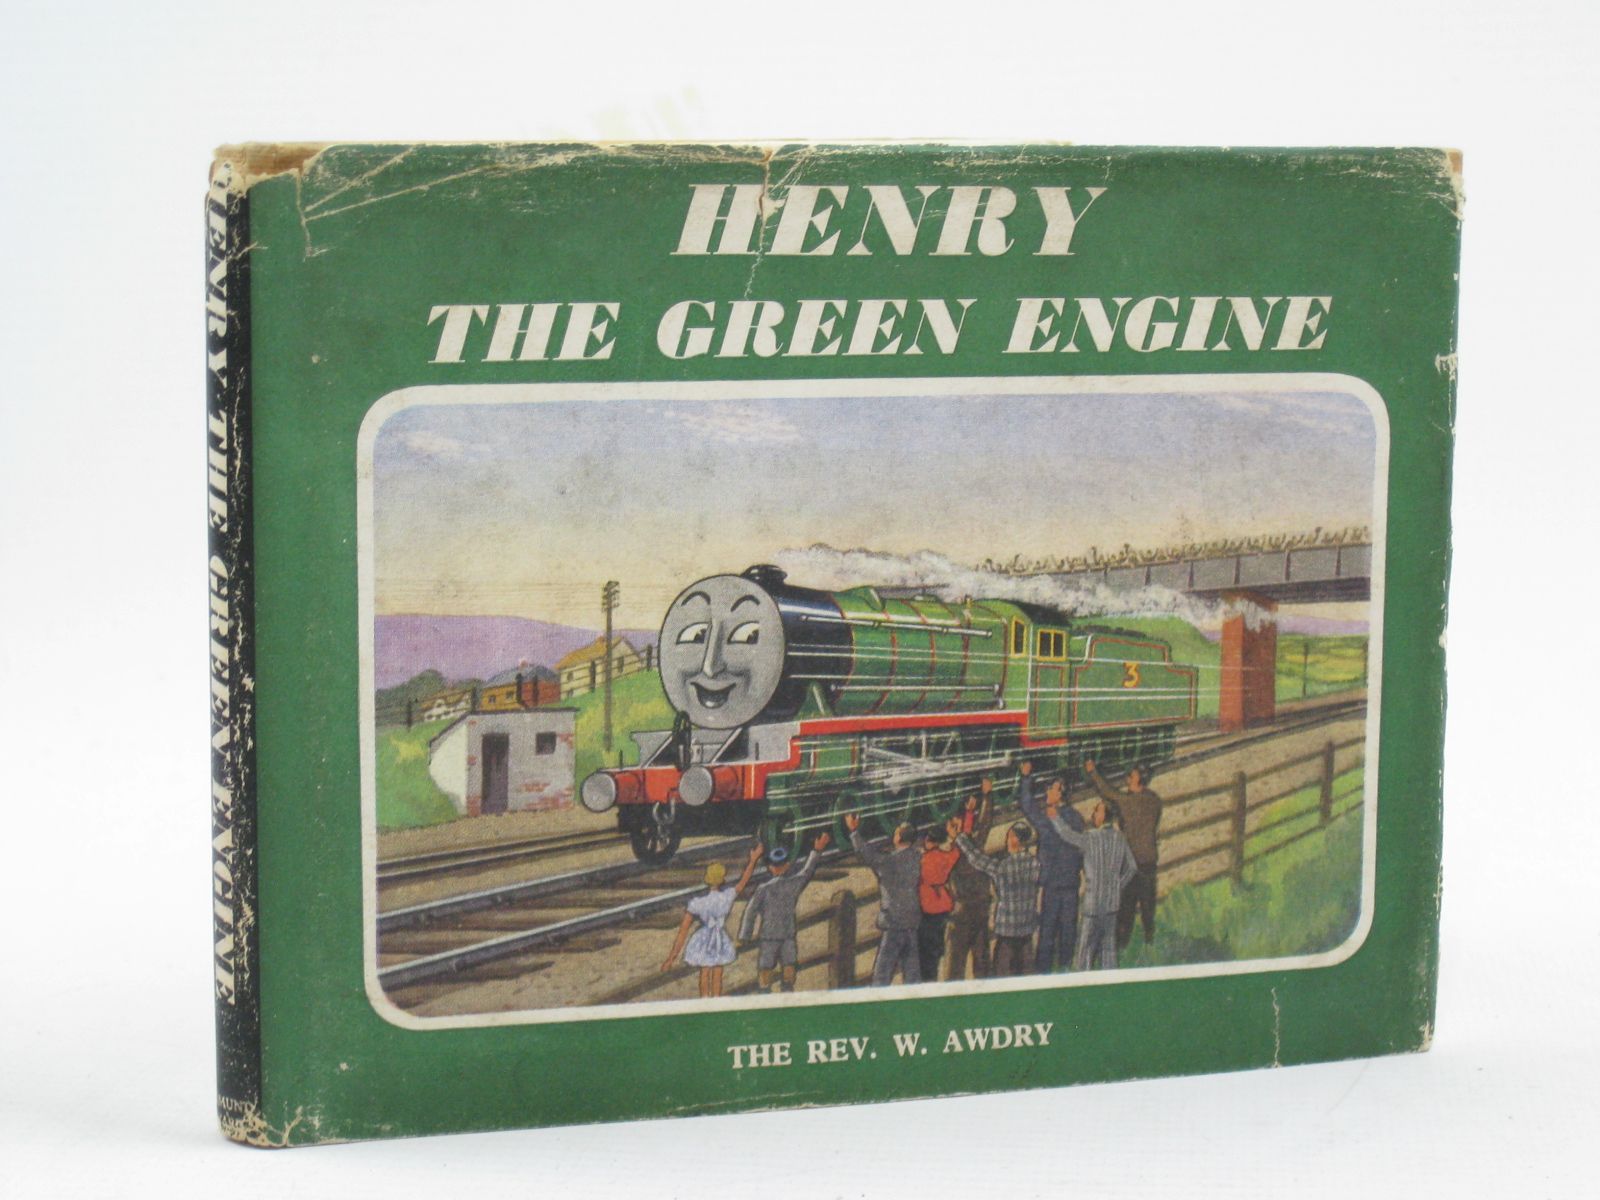 Cover of HENRY THE GREEN ENGINE by Rev. W. Awdry